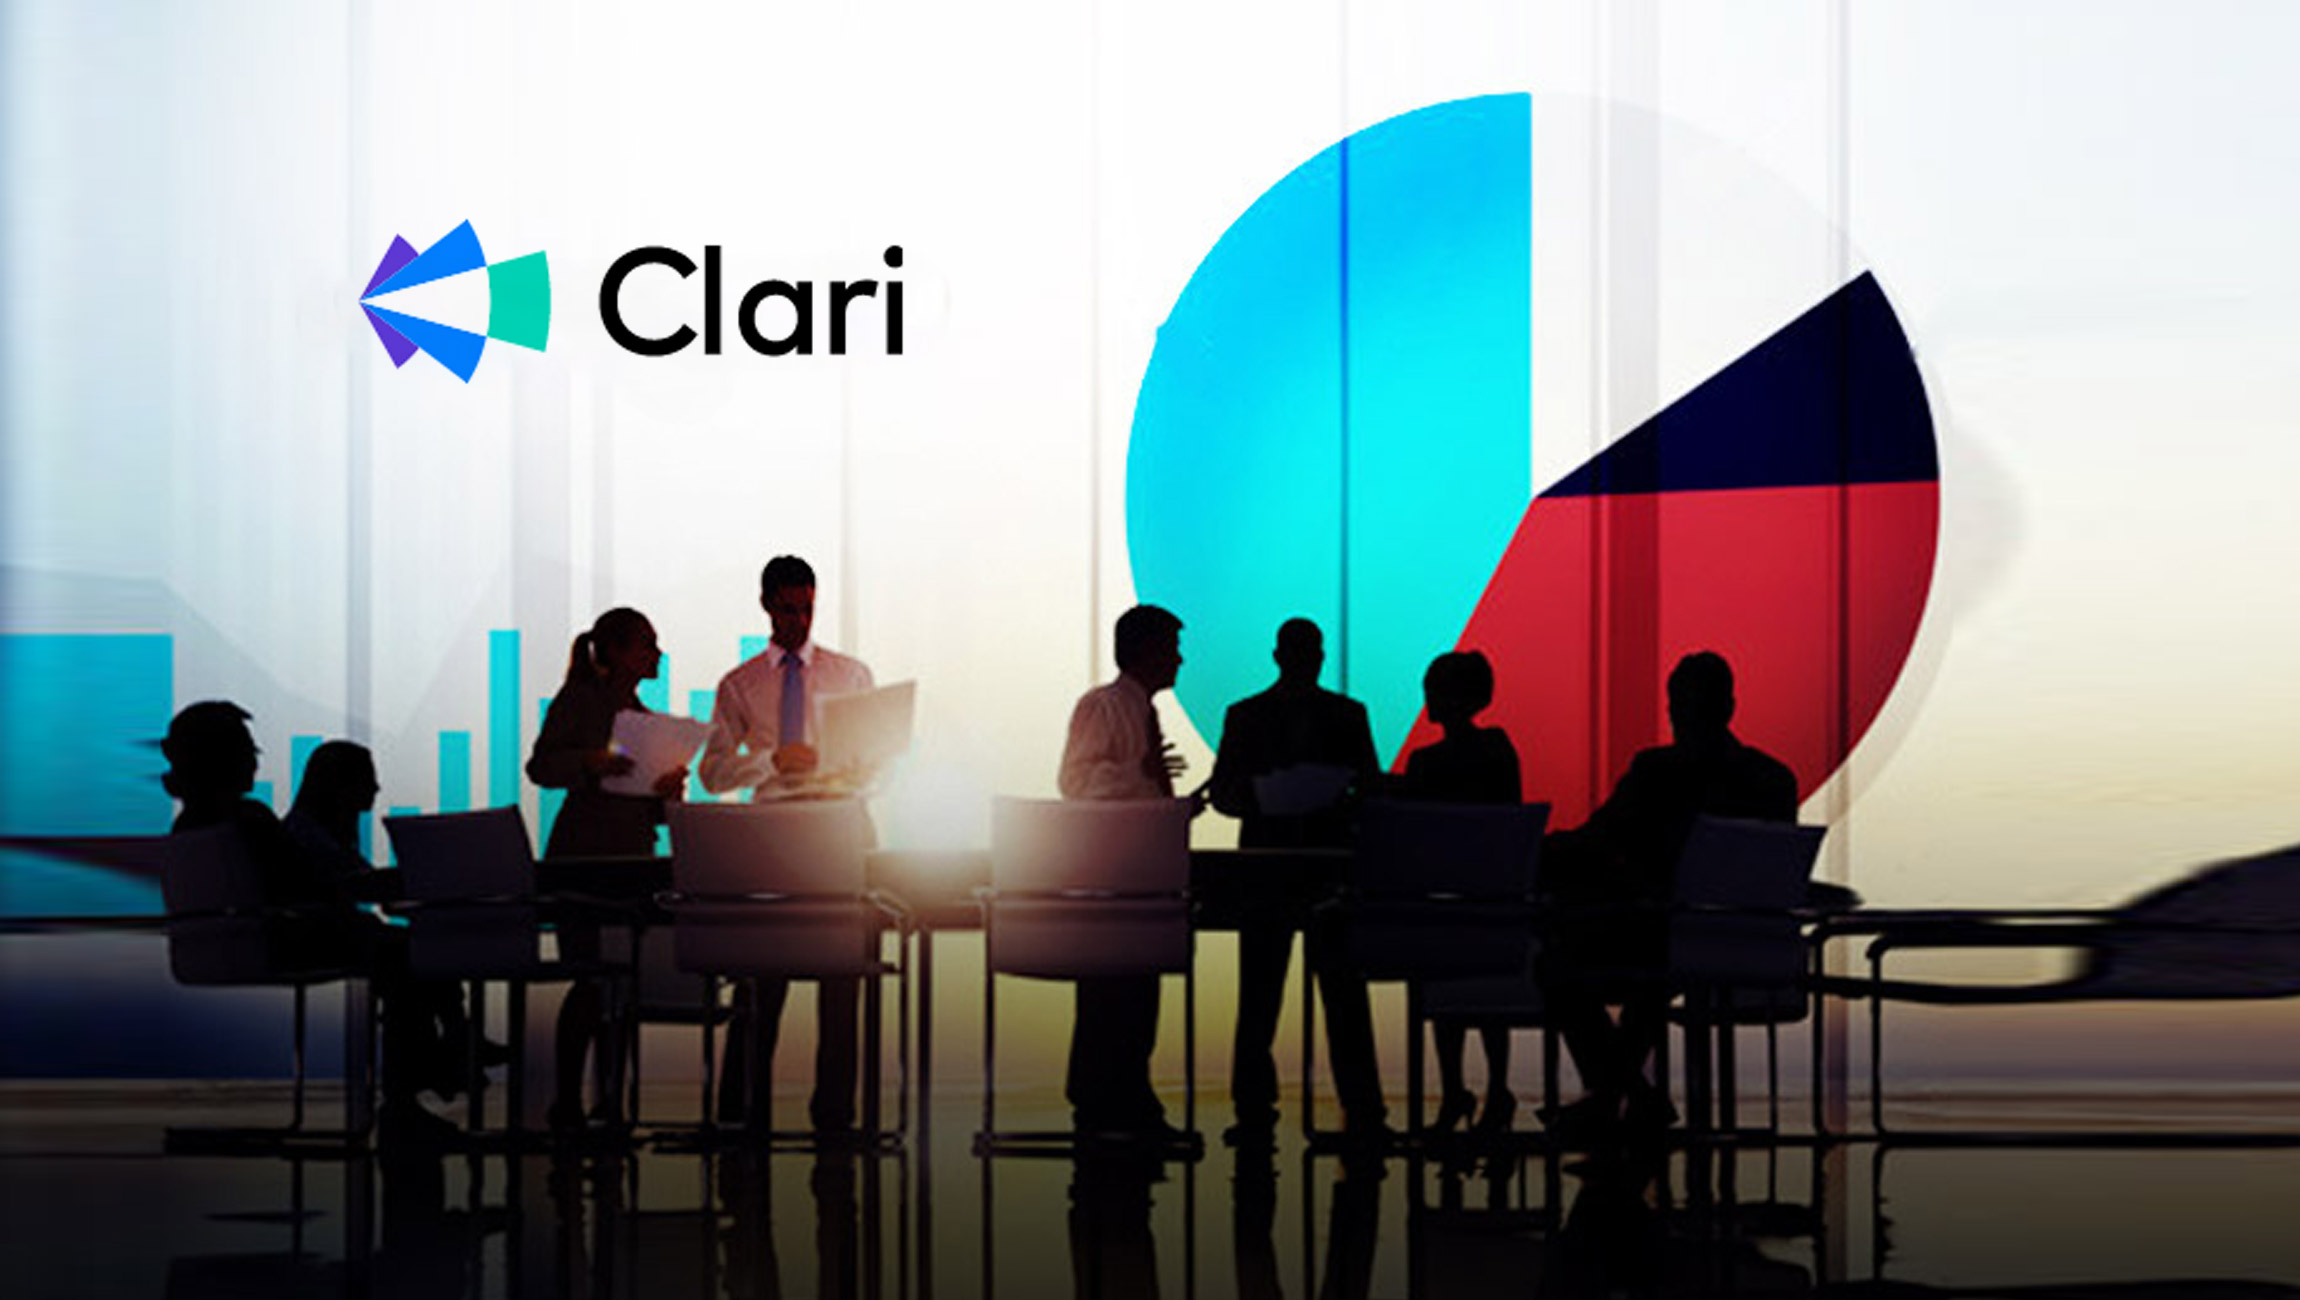 G2 Creates New Revenue Operations Category and Positions Clari as the #1 Leader